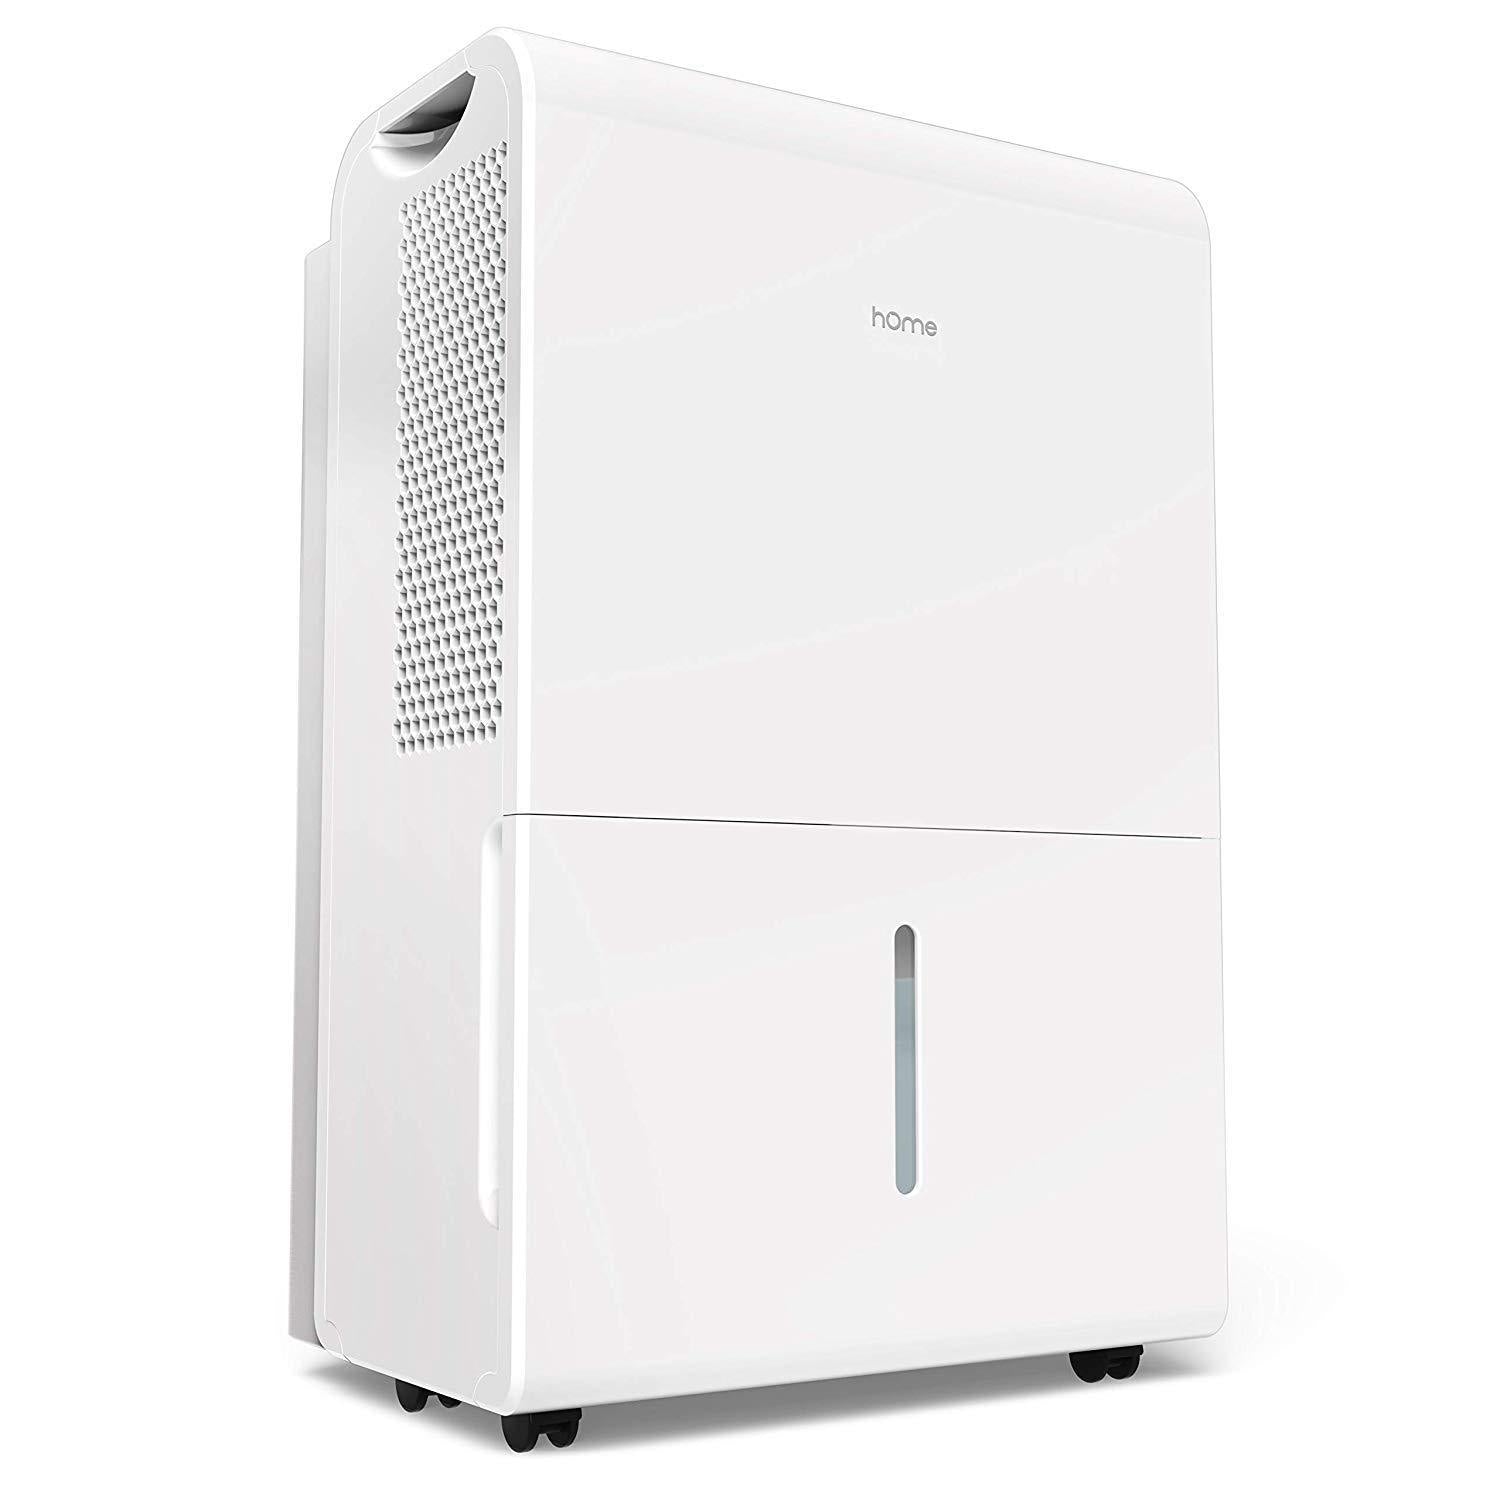 hOmeLabs 4500 Sq. Ft Energy Star Dehumidifier - Ideal for Large Rooms and Home Basements